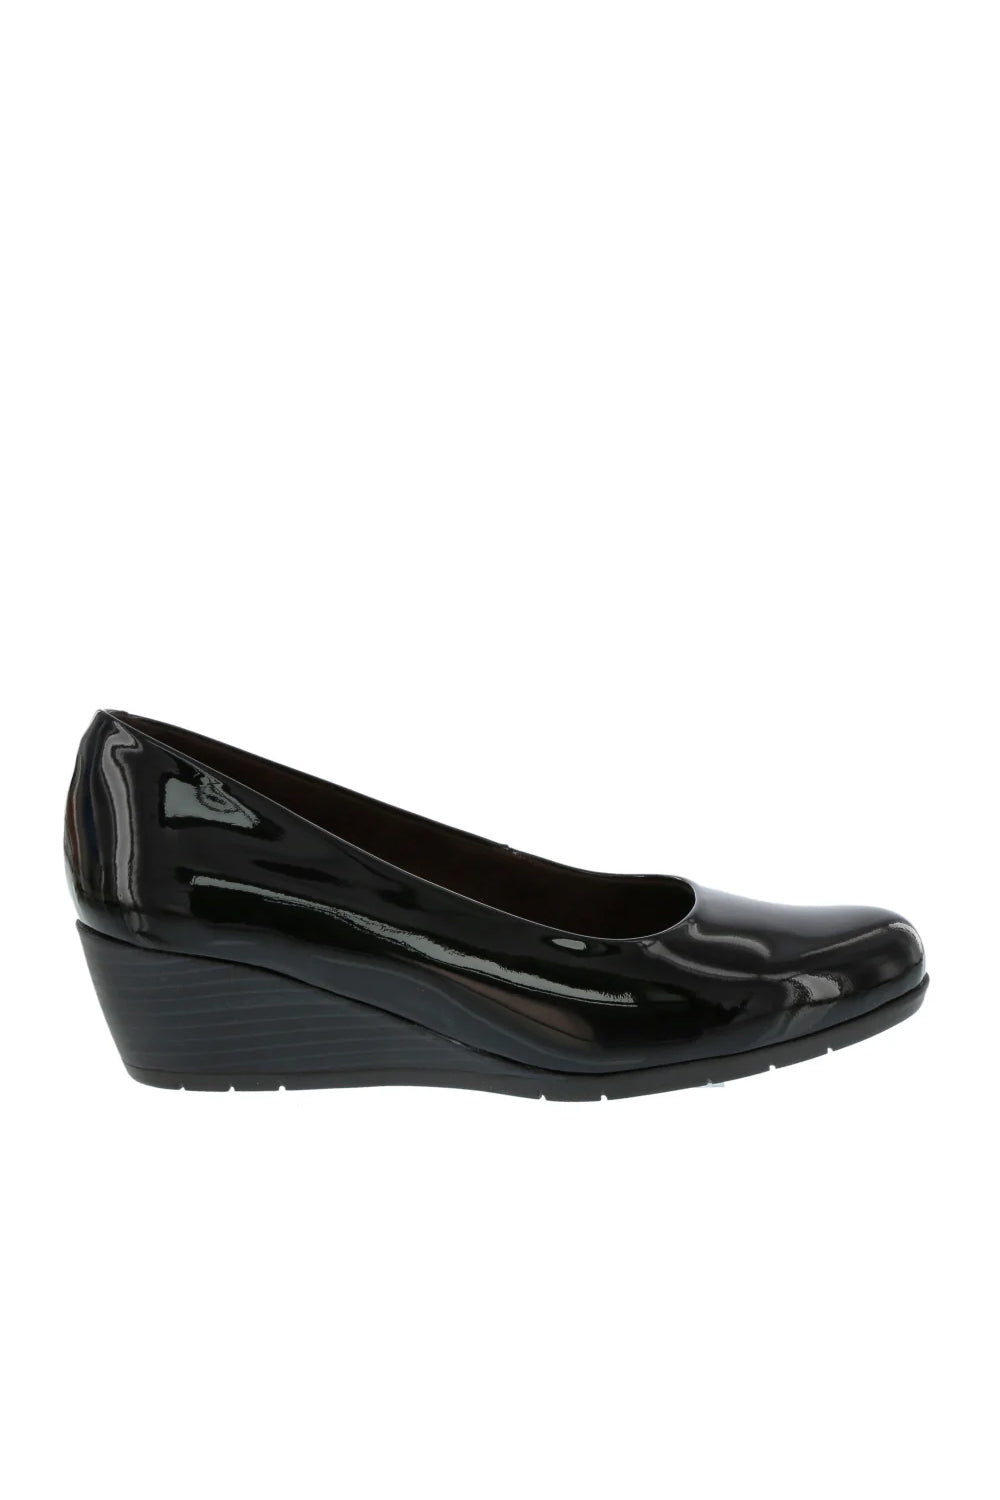 Neo Patent Leather Wedge Shoe in Black 6700